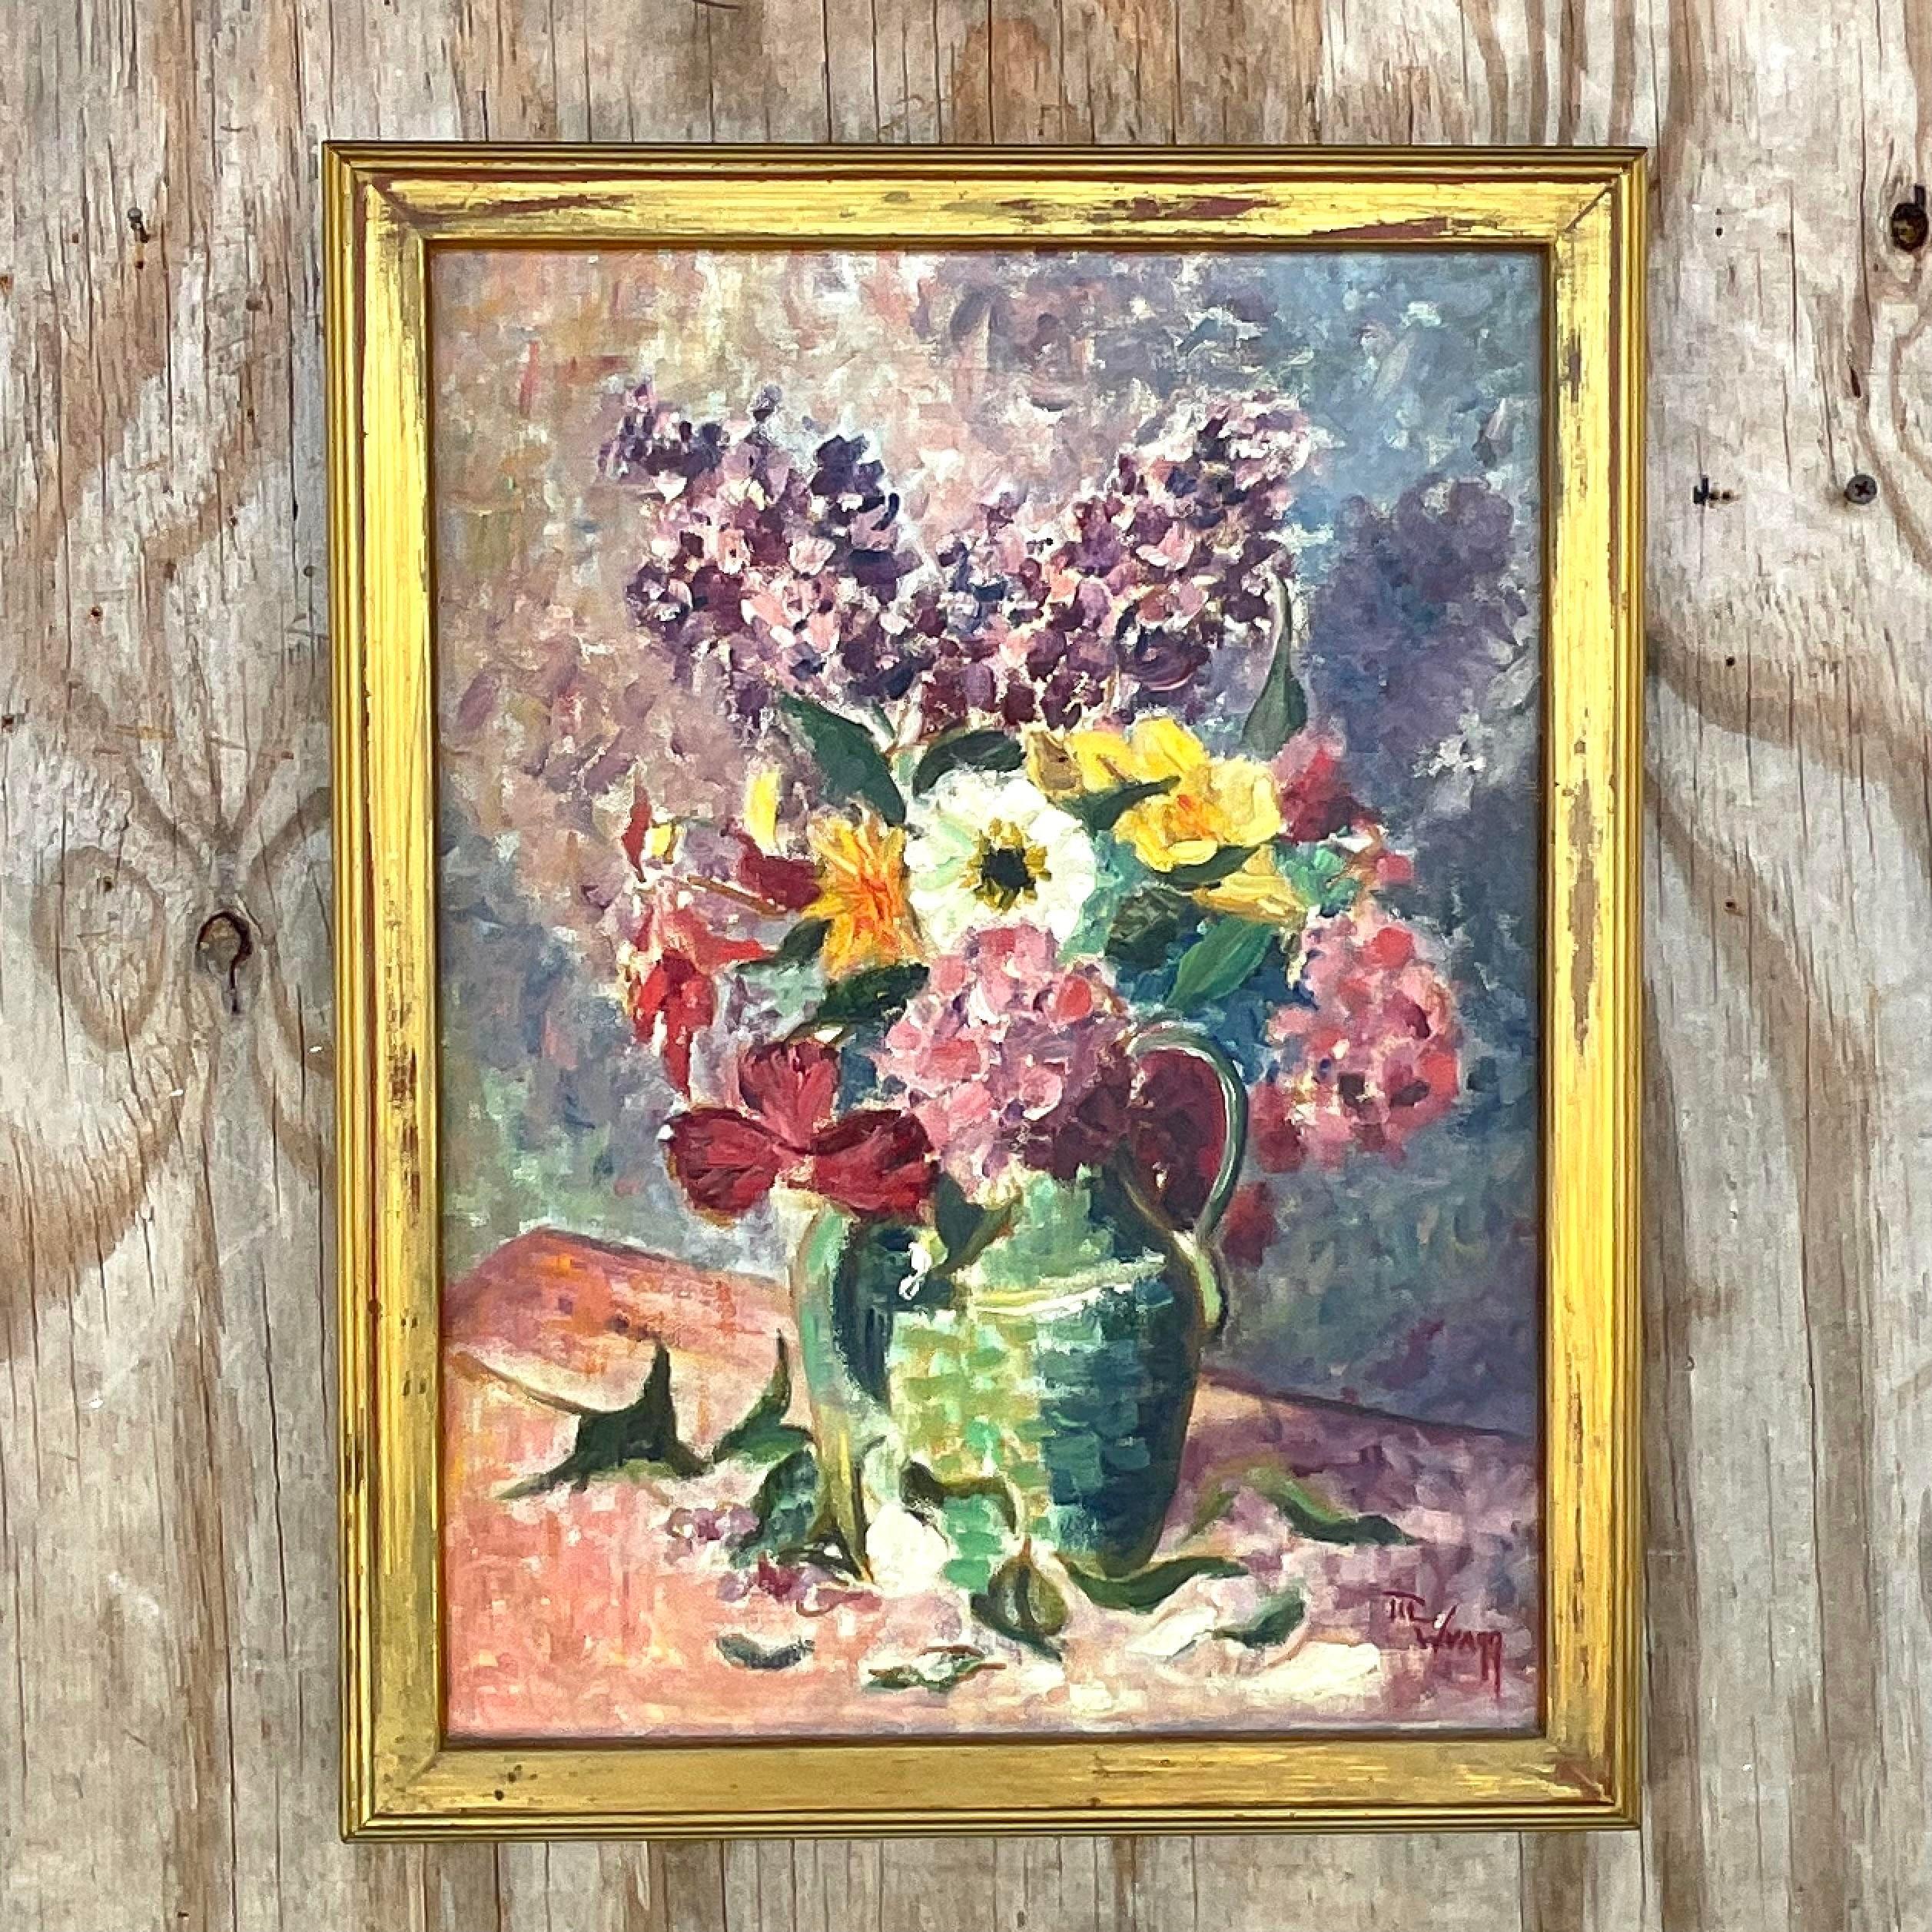 A fabulous vintage Boho original oil on canvas. A brightly colored floral composition in a painterly style. Signed by the artist. Acquired from a Palm Beach estate. 